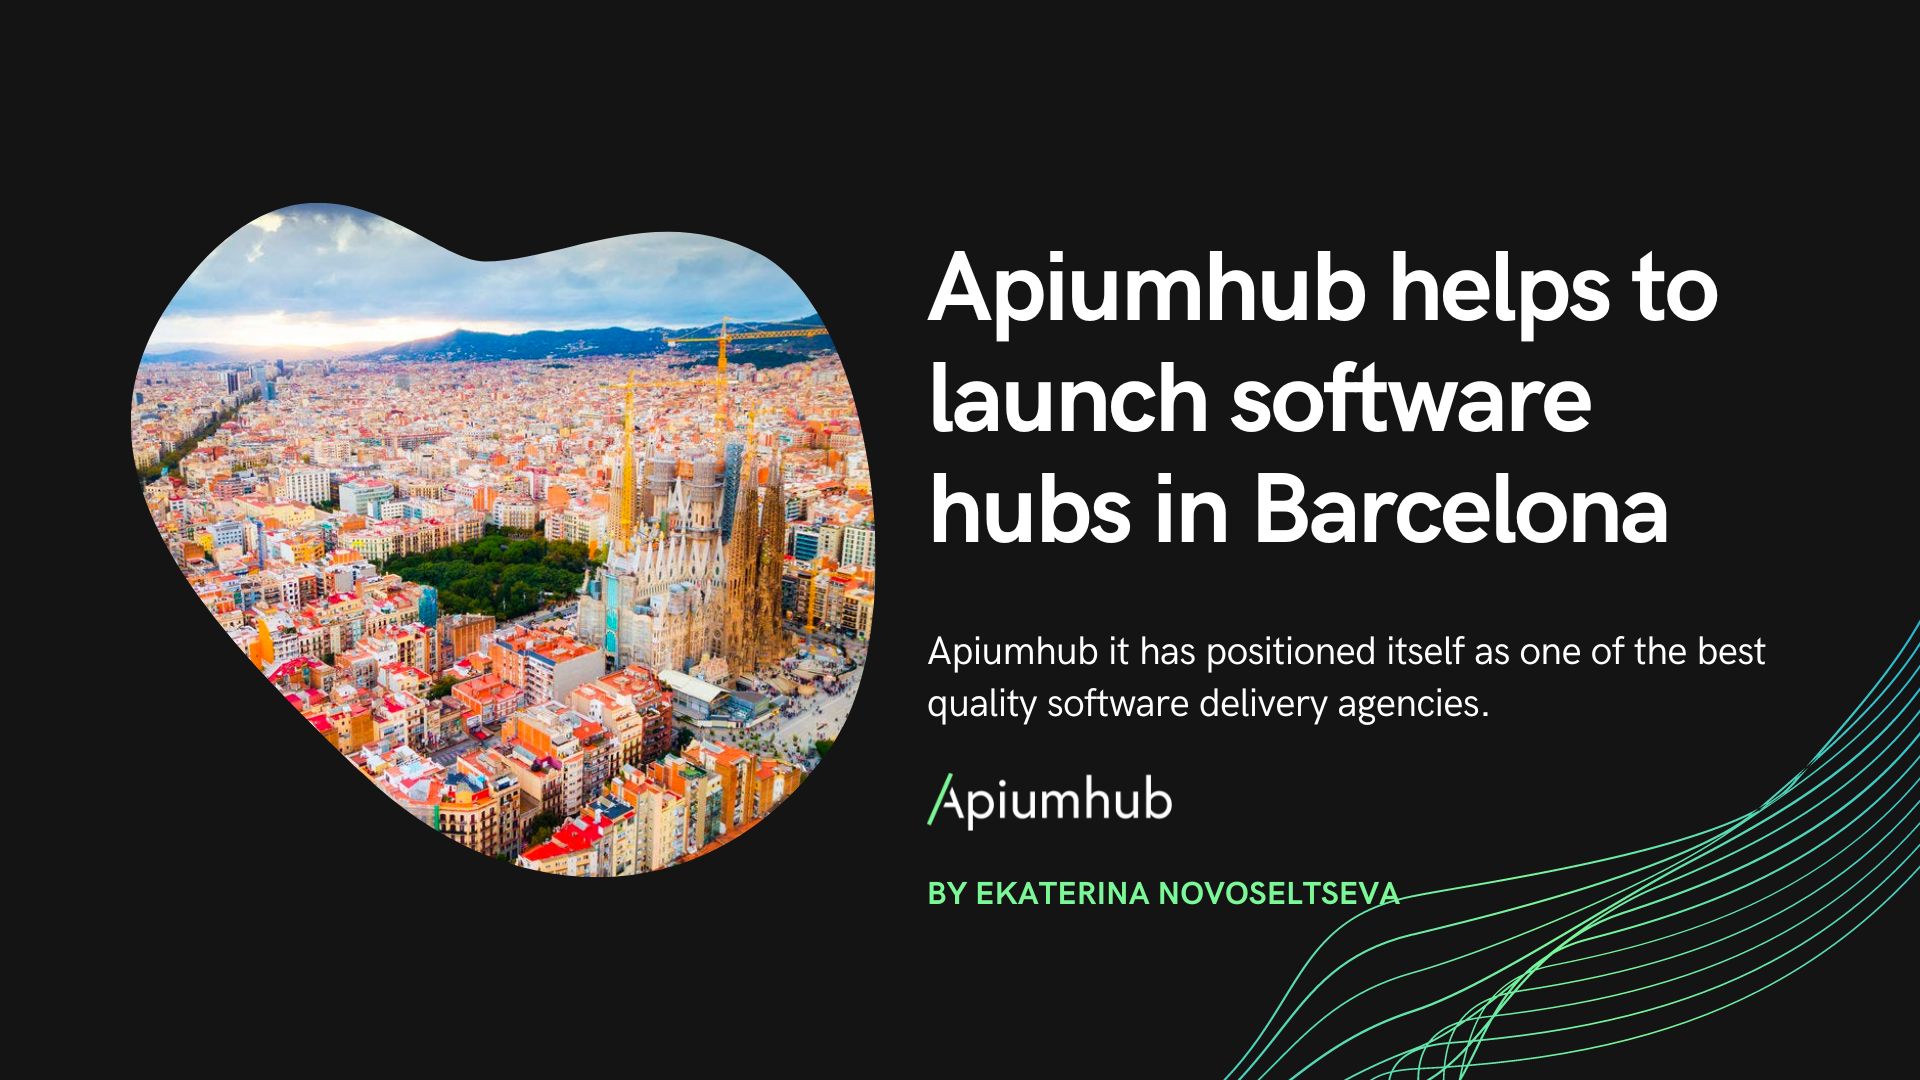 Apiumhub helps to launch software hubs in Barcelona